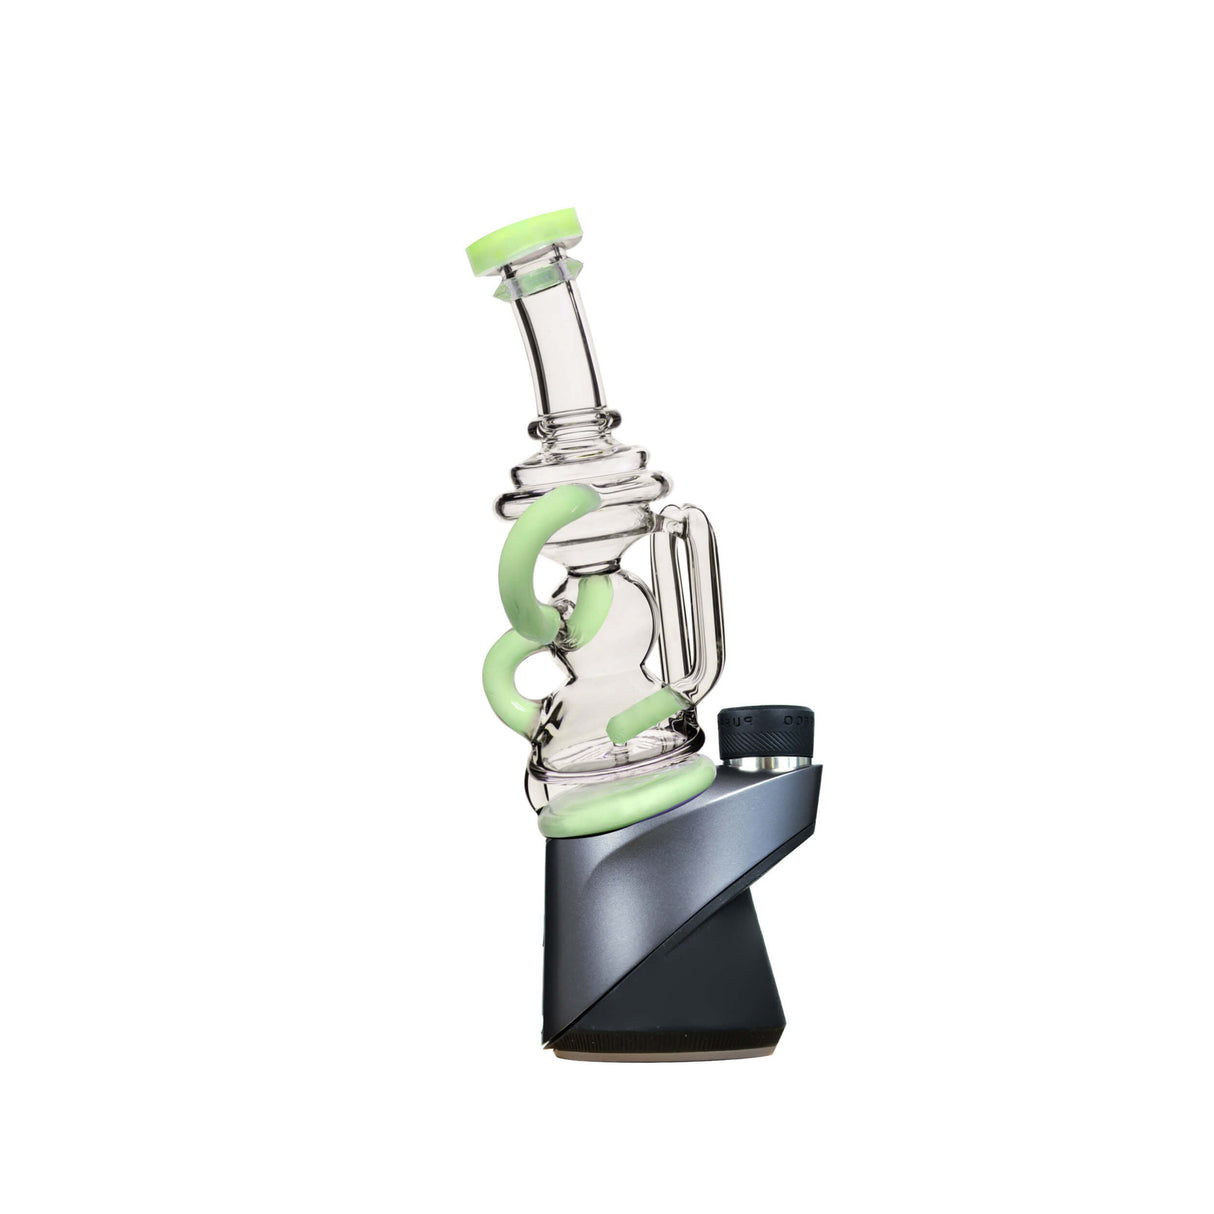 Calibear Puffco Attachment Mini Recycler in Milky Green, Borosilicate Glass for Concentrates, Side View